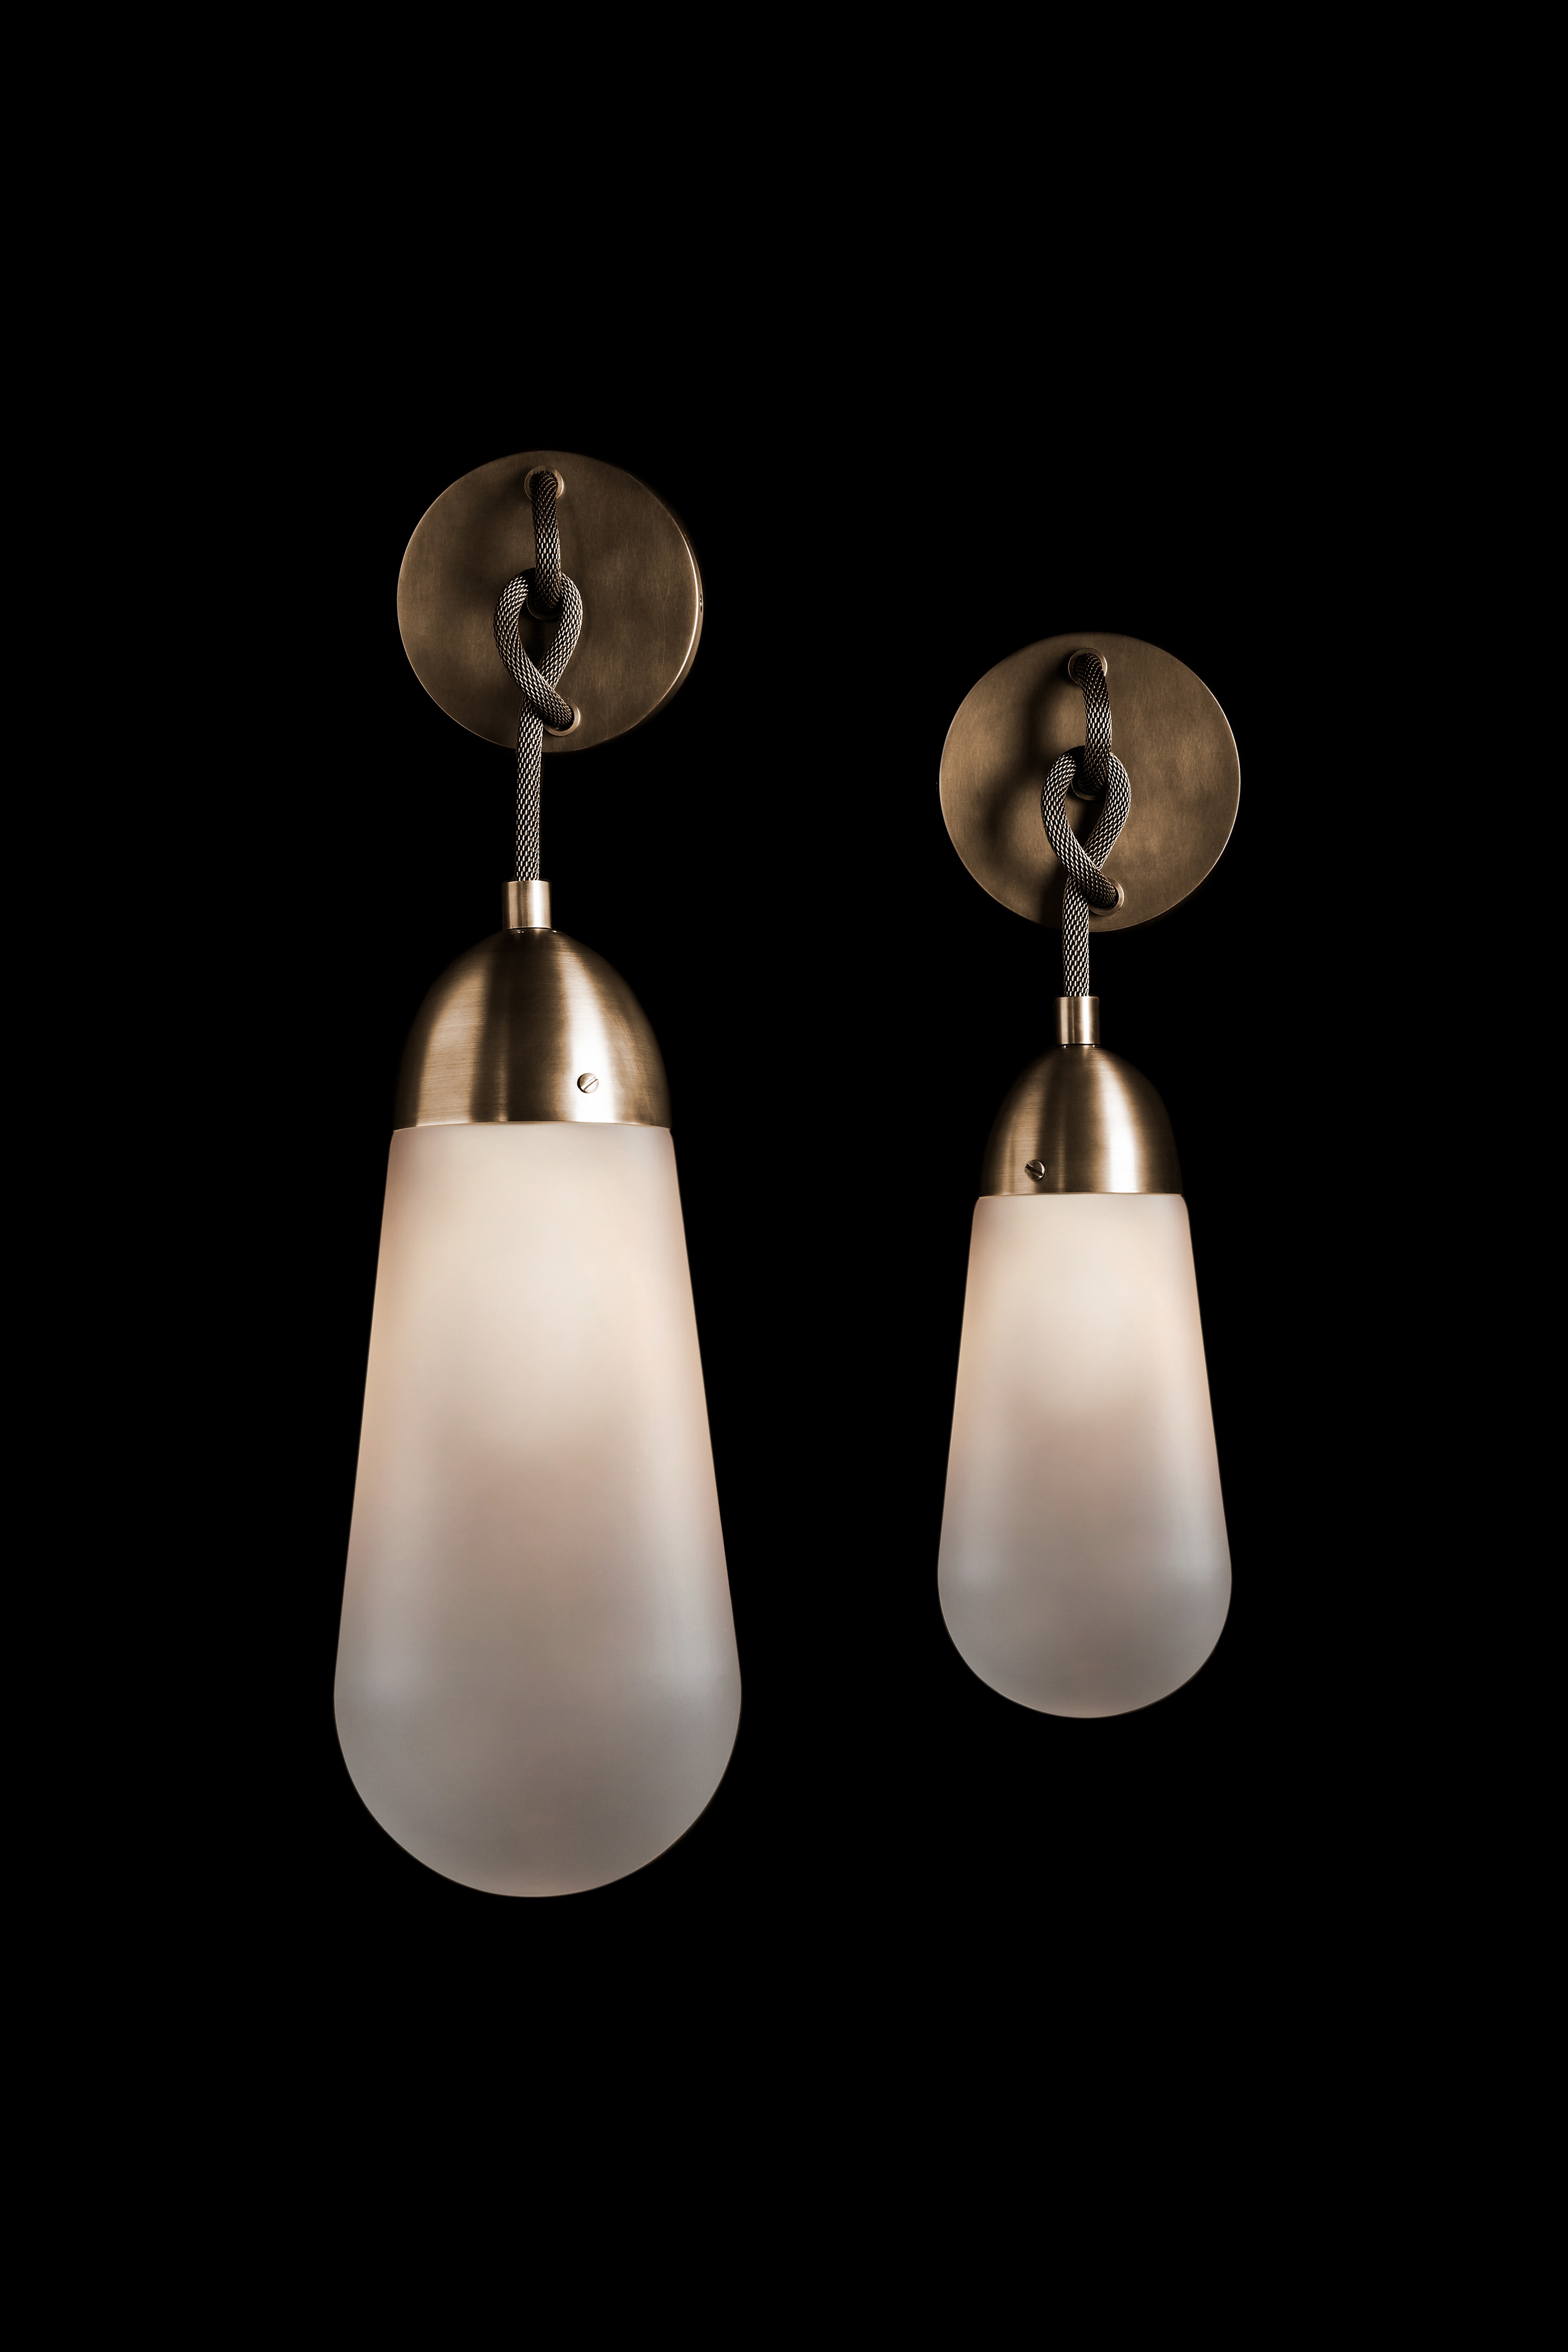 a pair of light fixtures on a black background